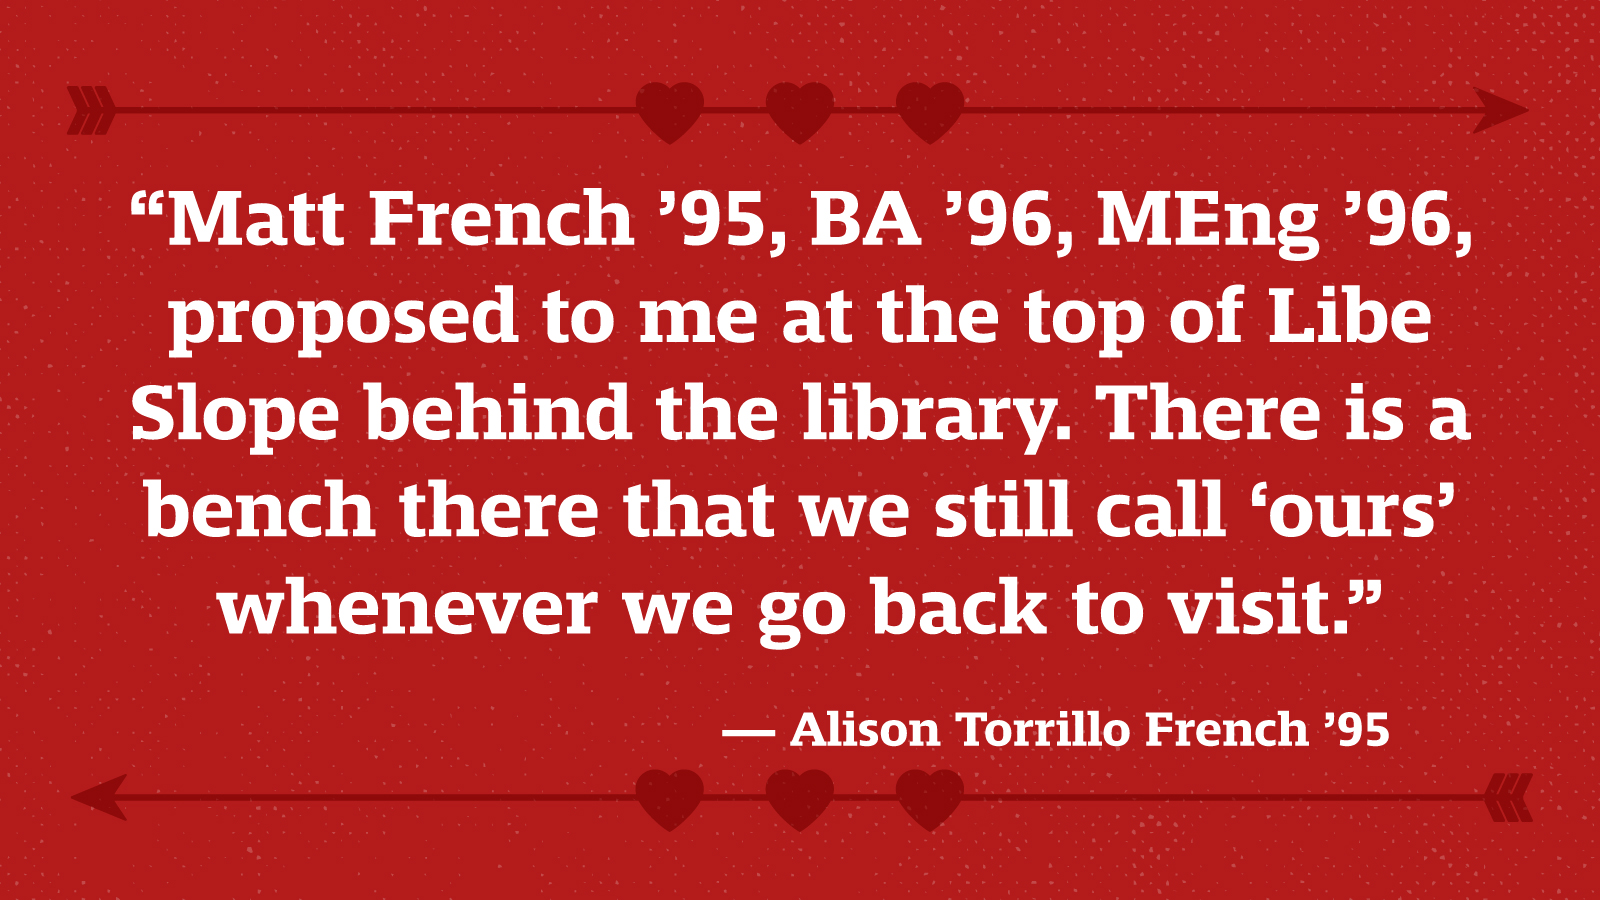 “Matt French ’95, BA ’96, MEng ’96, proposed to me at the top of Libe Slope behind the library. There is a bench there that we still call ‘ours’ whenever we go back to visit.” — Alison Torrillo French ’95